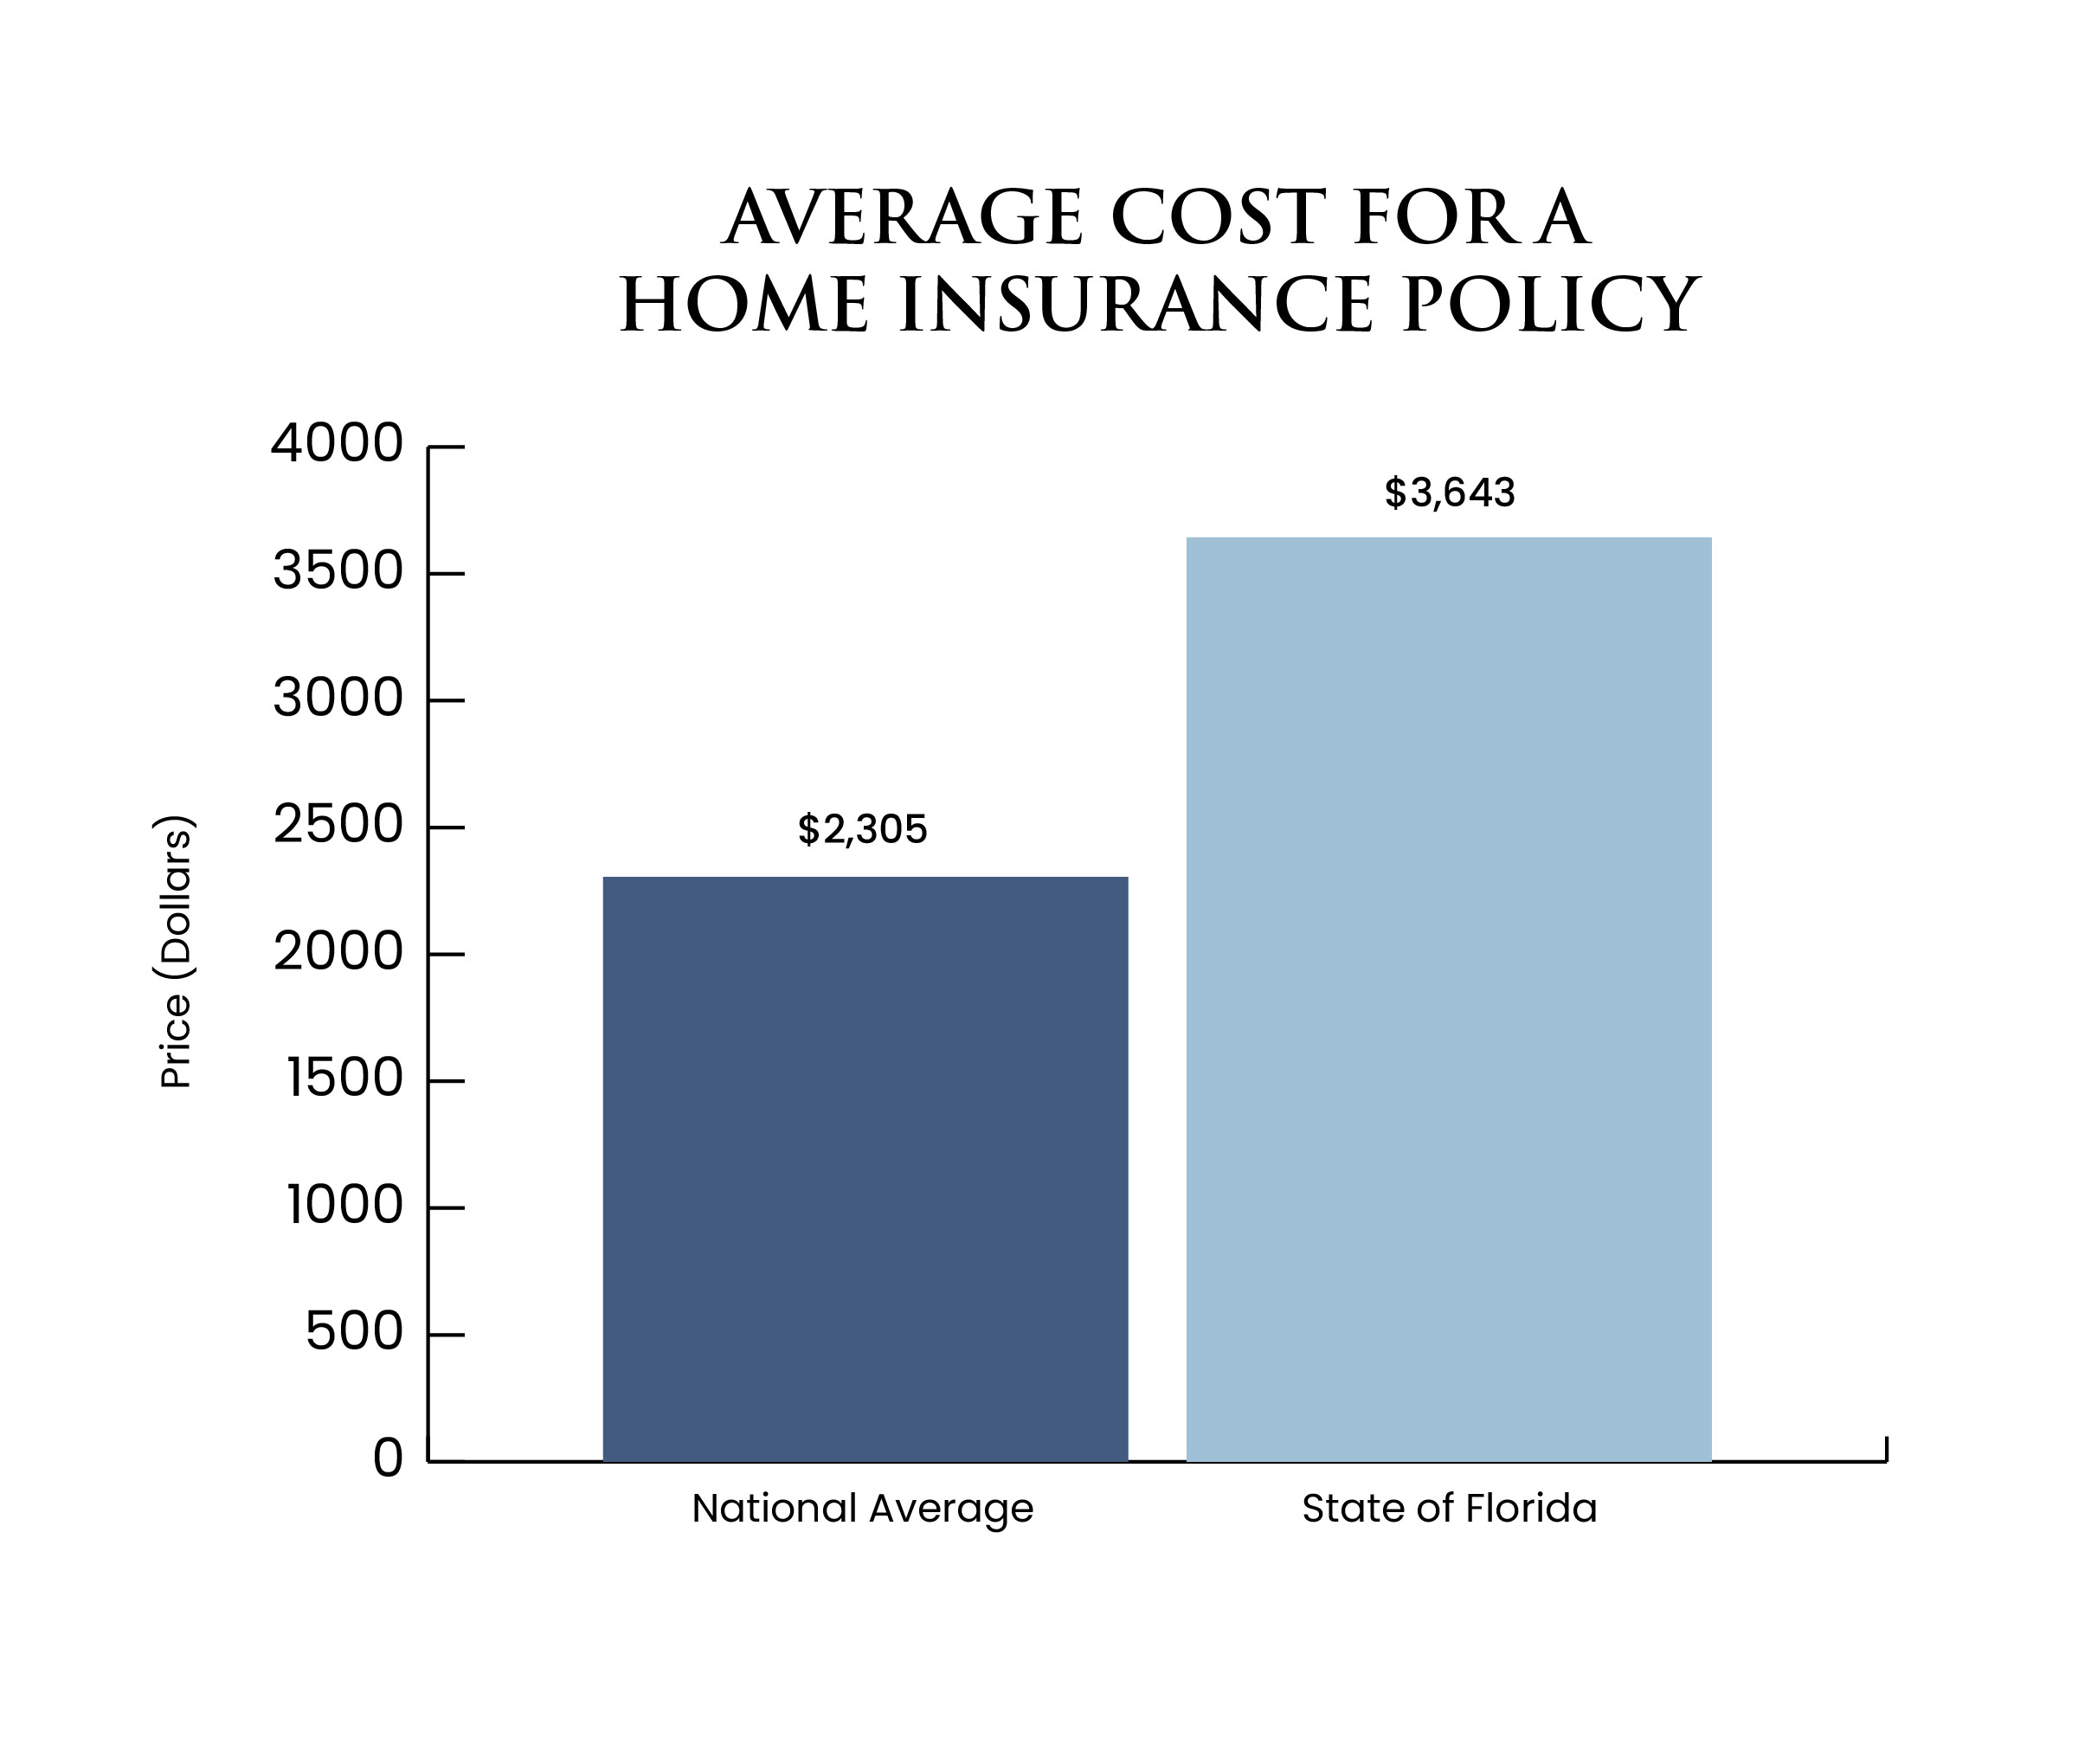 Comparison between national average and Florida's average cost of a home insurance policy.